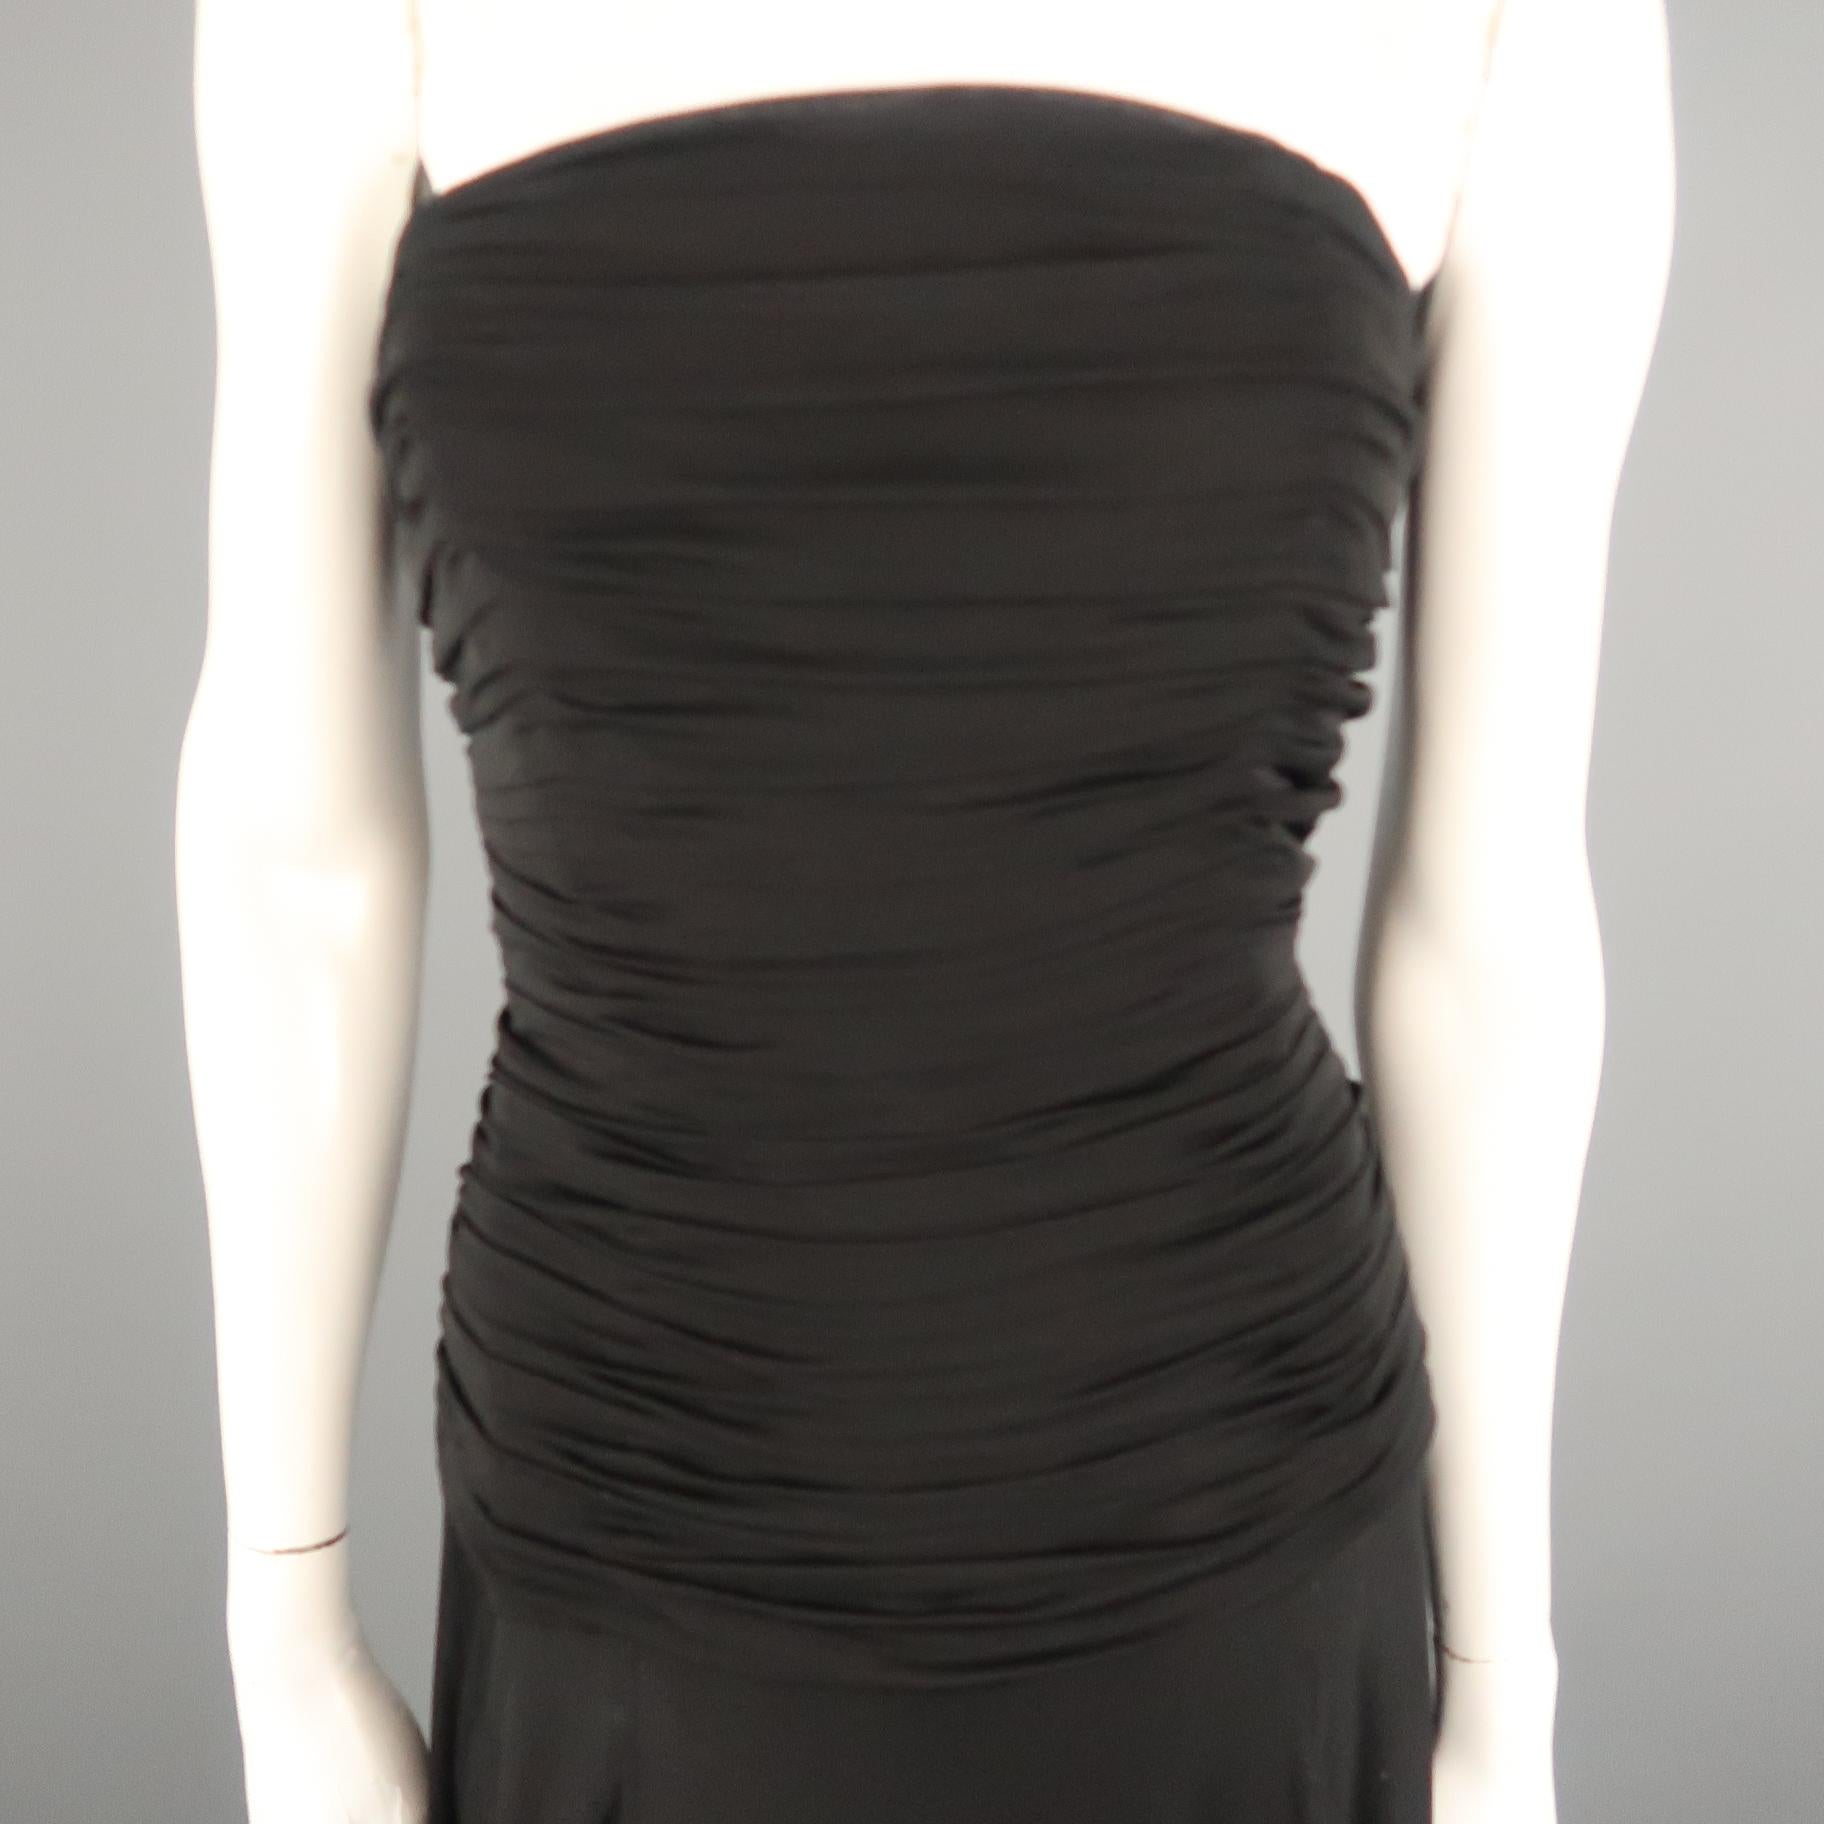 RALPH LAUREN COLLECTION gown comes in black viscose with a ruched drape detailed bustier top and full layered skirt. Minor wear along hem. As-is.
 
Very Good Pre-Owned Condition.
Marked: 10
 
Measurements:
 
Bust: 36 in.
Waist: 28 in.
Hip: 38